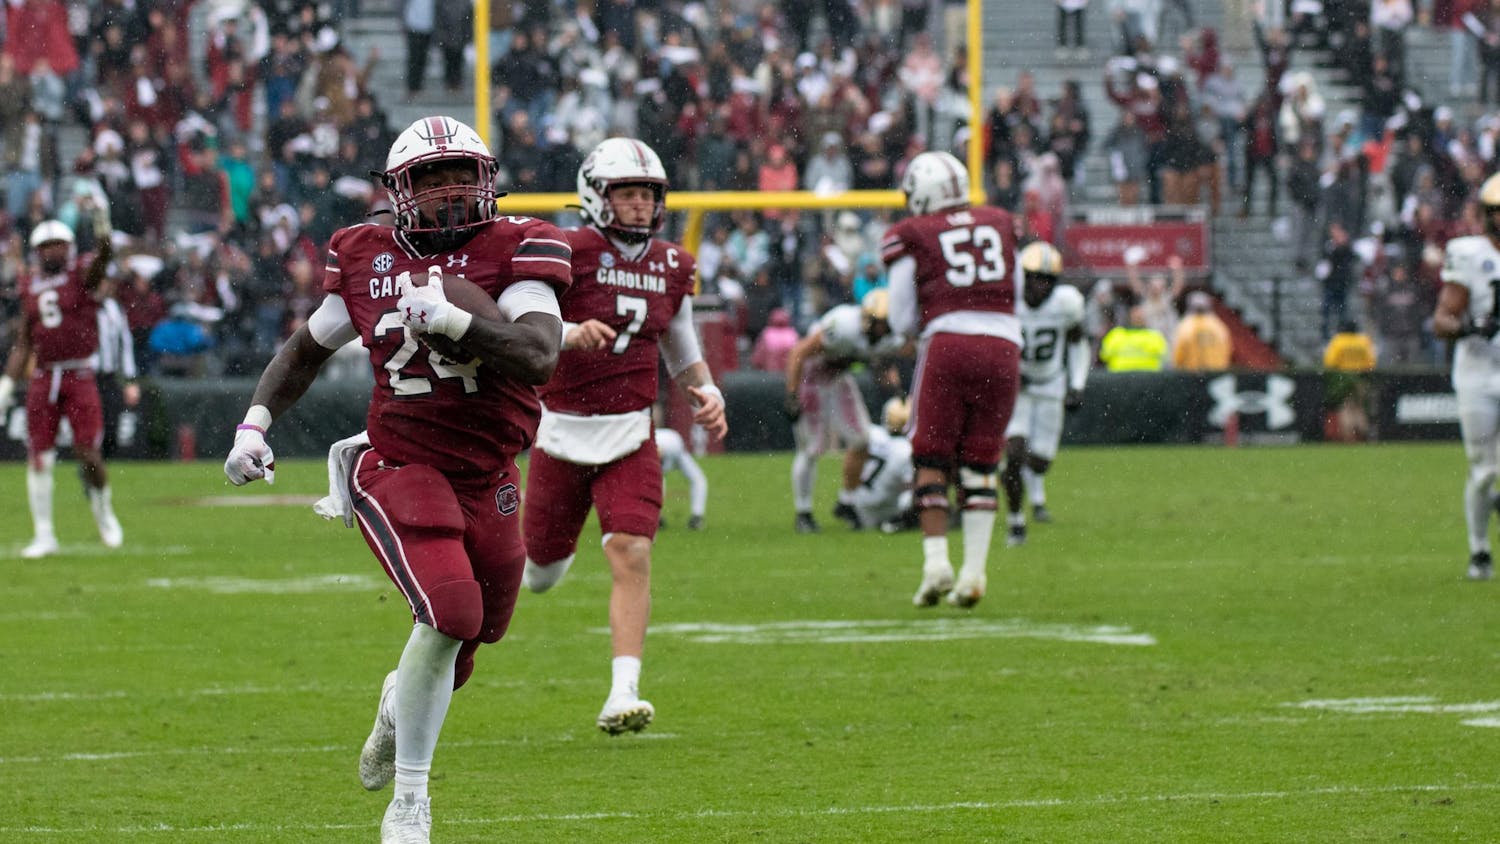 The South Carolina Gamecocks faced the Vanderbilt Commodores at Williams-Brice Stadium on Nov. 11, 2023. The Gamecocks commanded a 47-6 victory, putting the team at 4-6 on the season. The Gamecocks totaled 487 yards to the Commodores' 234.